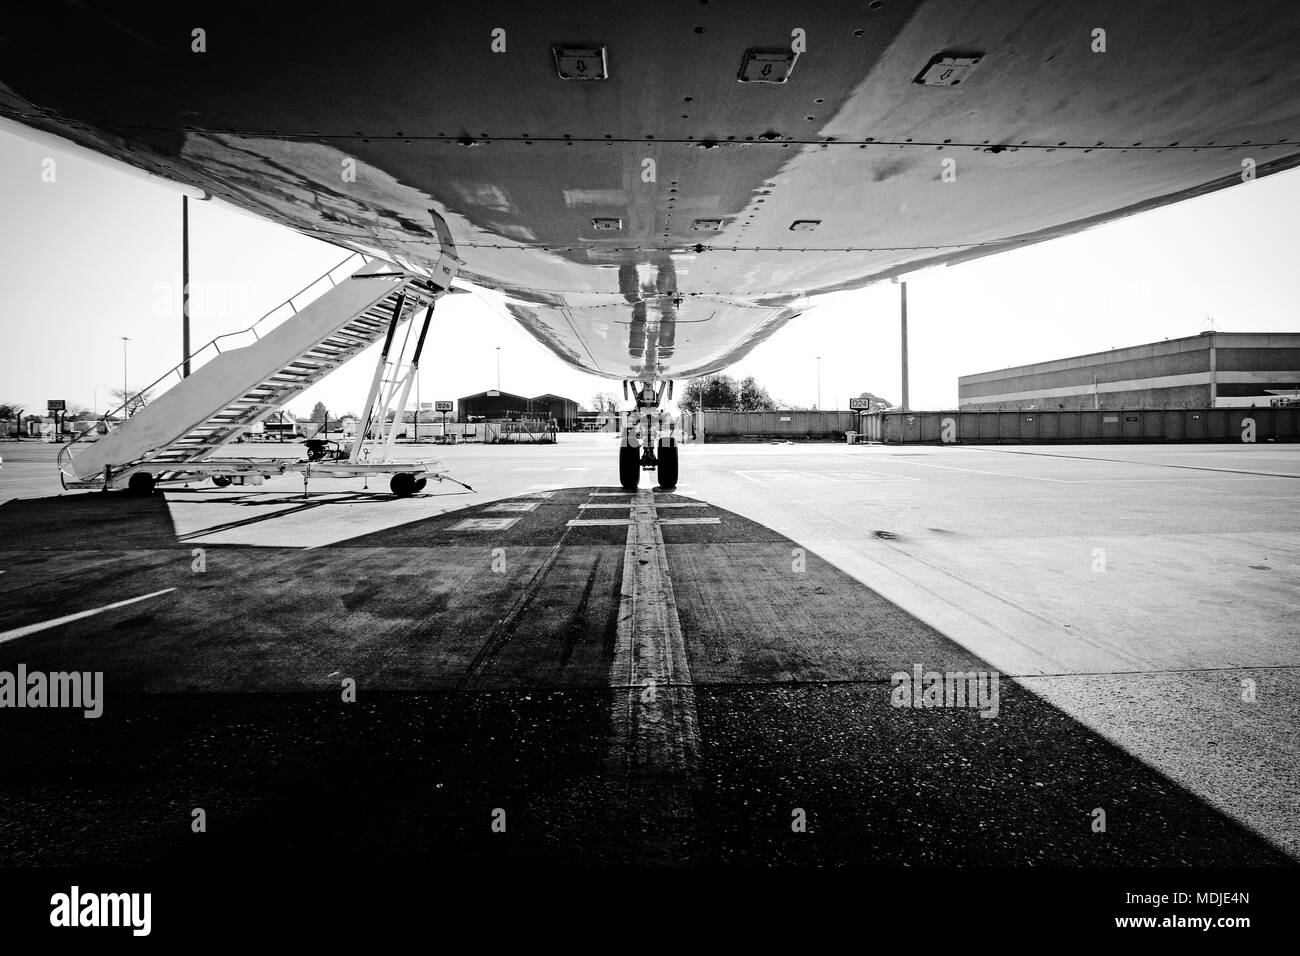 Underneath a Boeing 747-400 Stock Photo